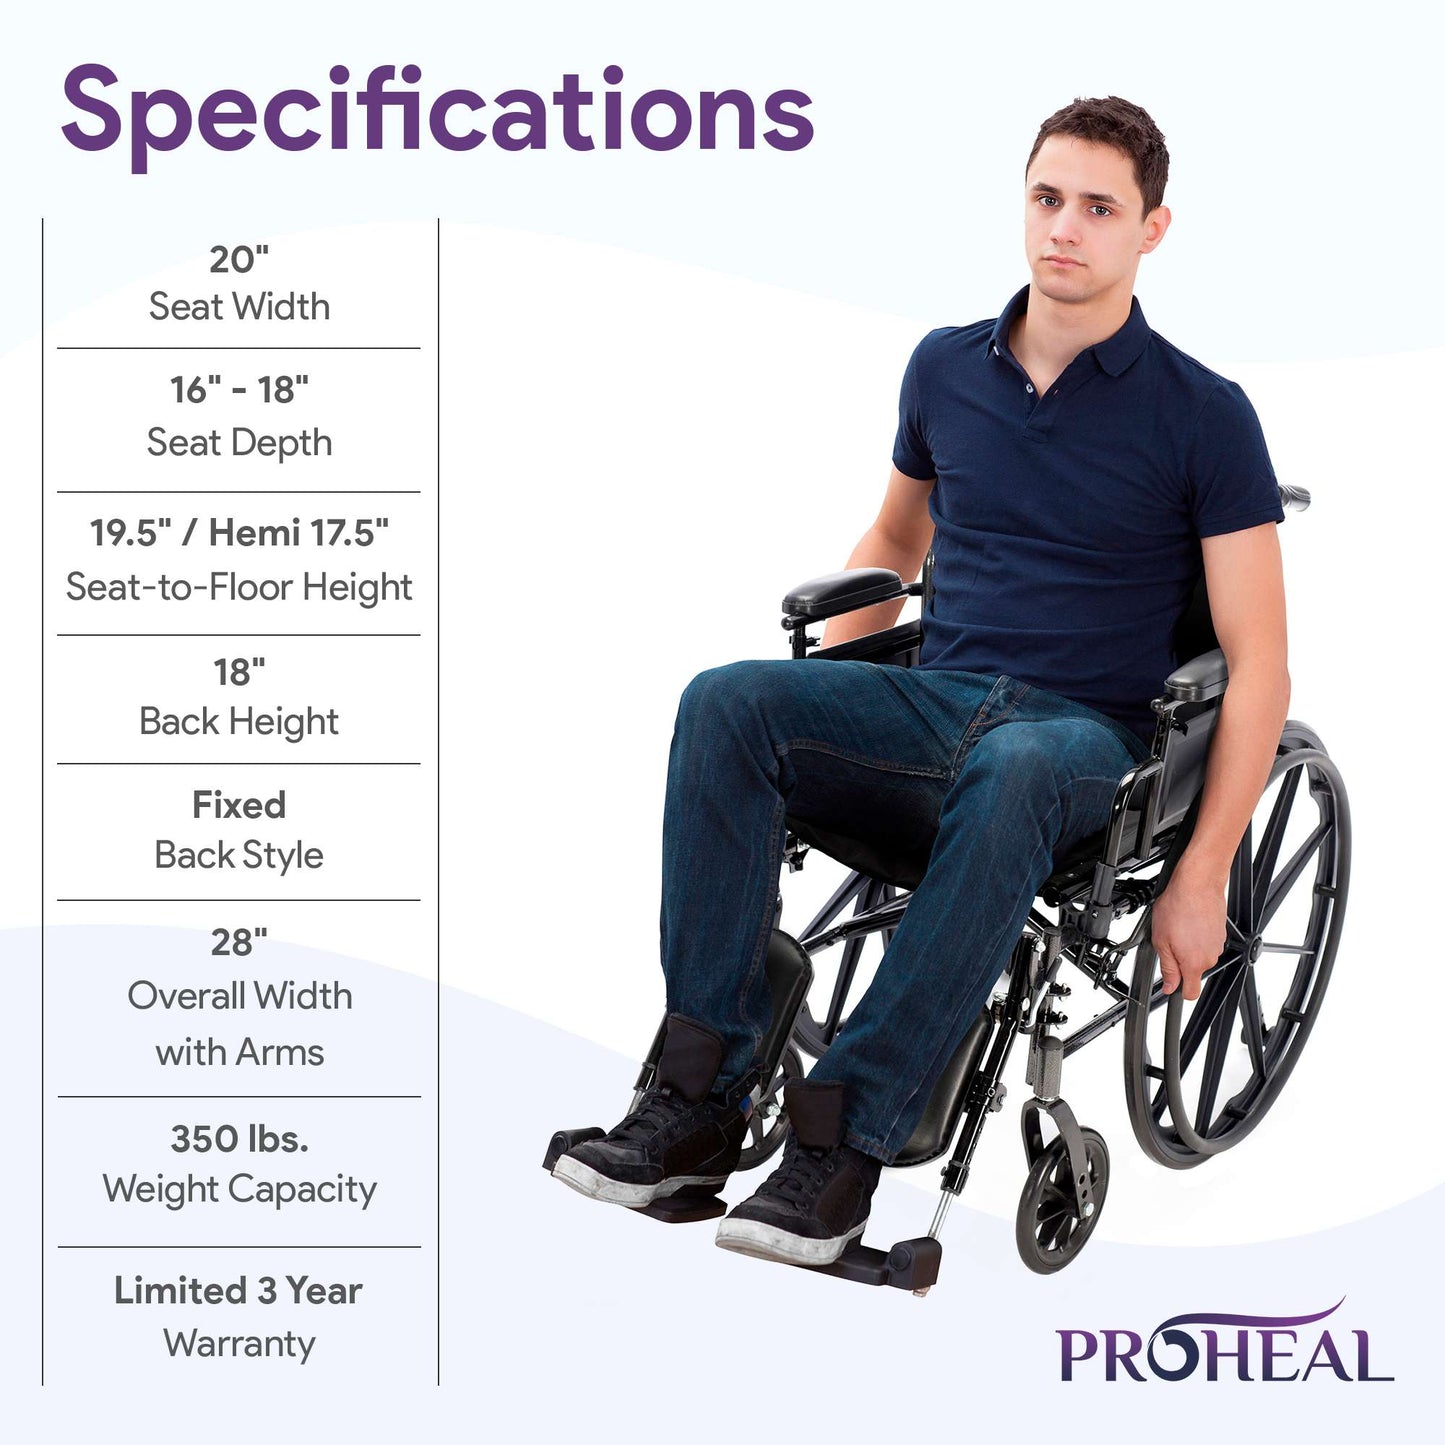 Chariot III K3 Series Wheelchair with Advanced Elevating Legrests for Enhanced Comfort